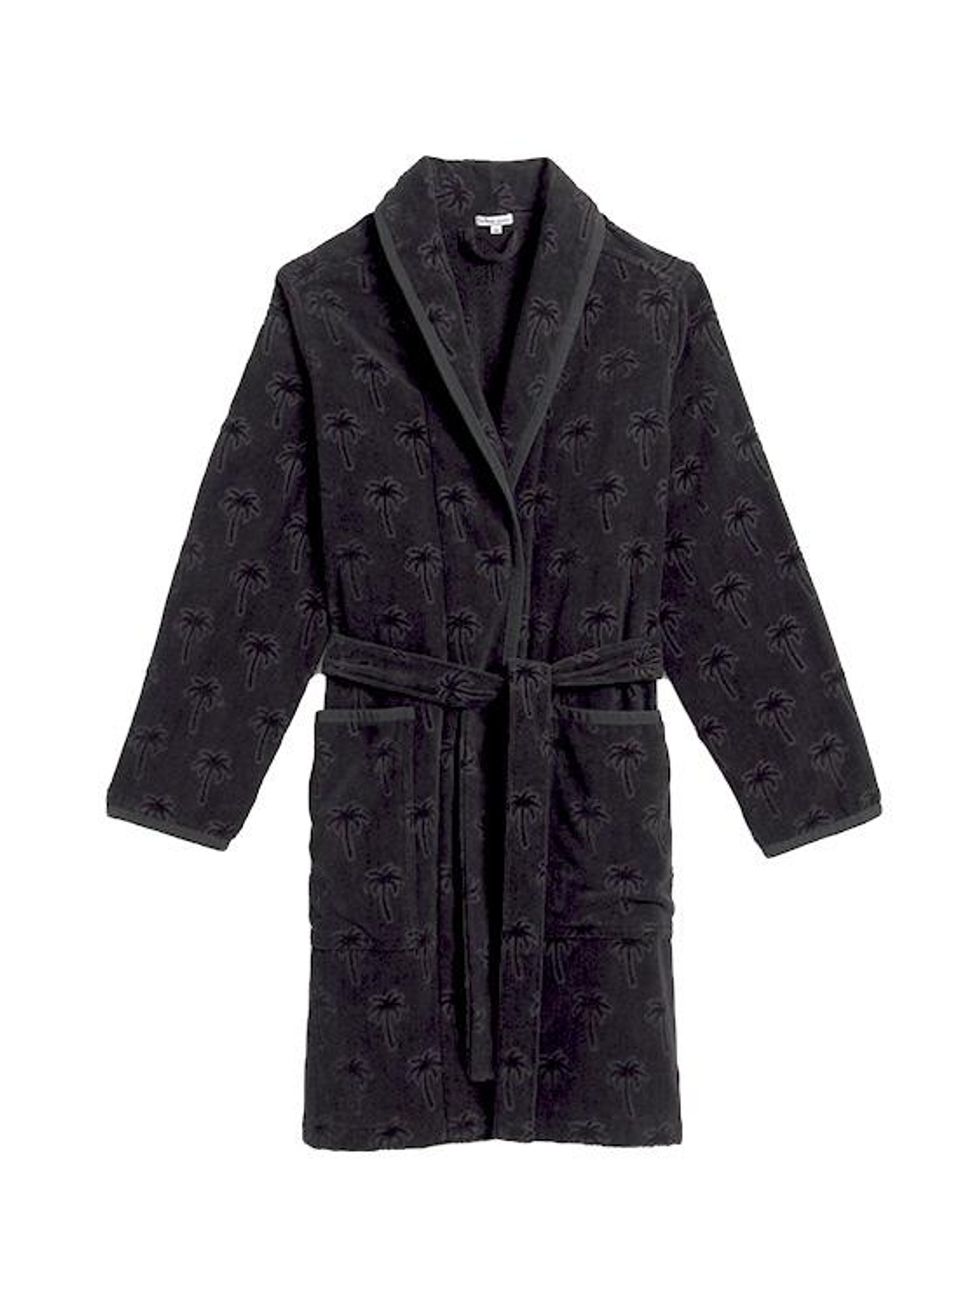 Robe by Tomas Maier, $730.